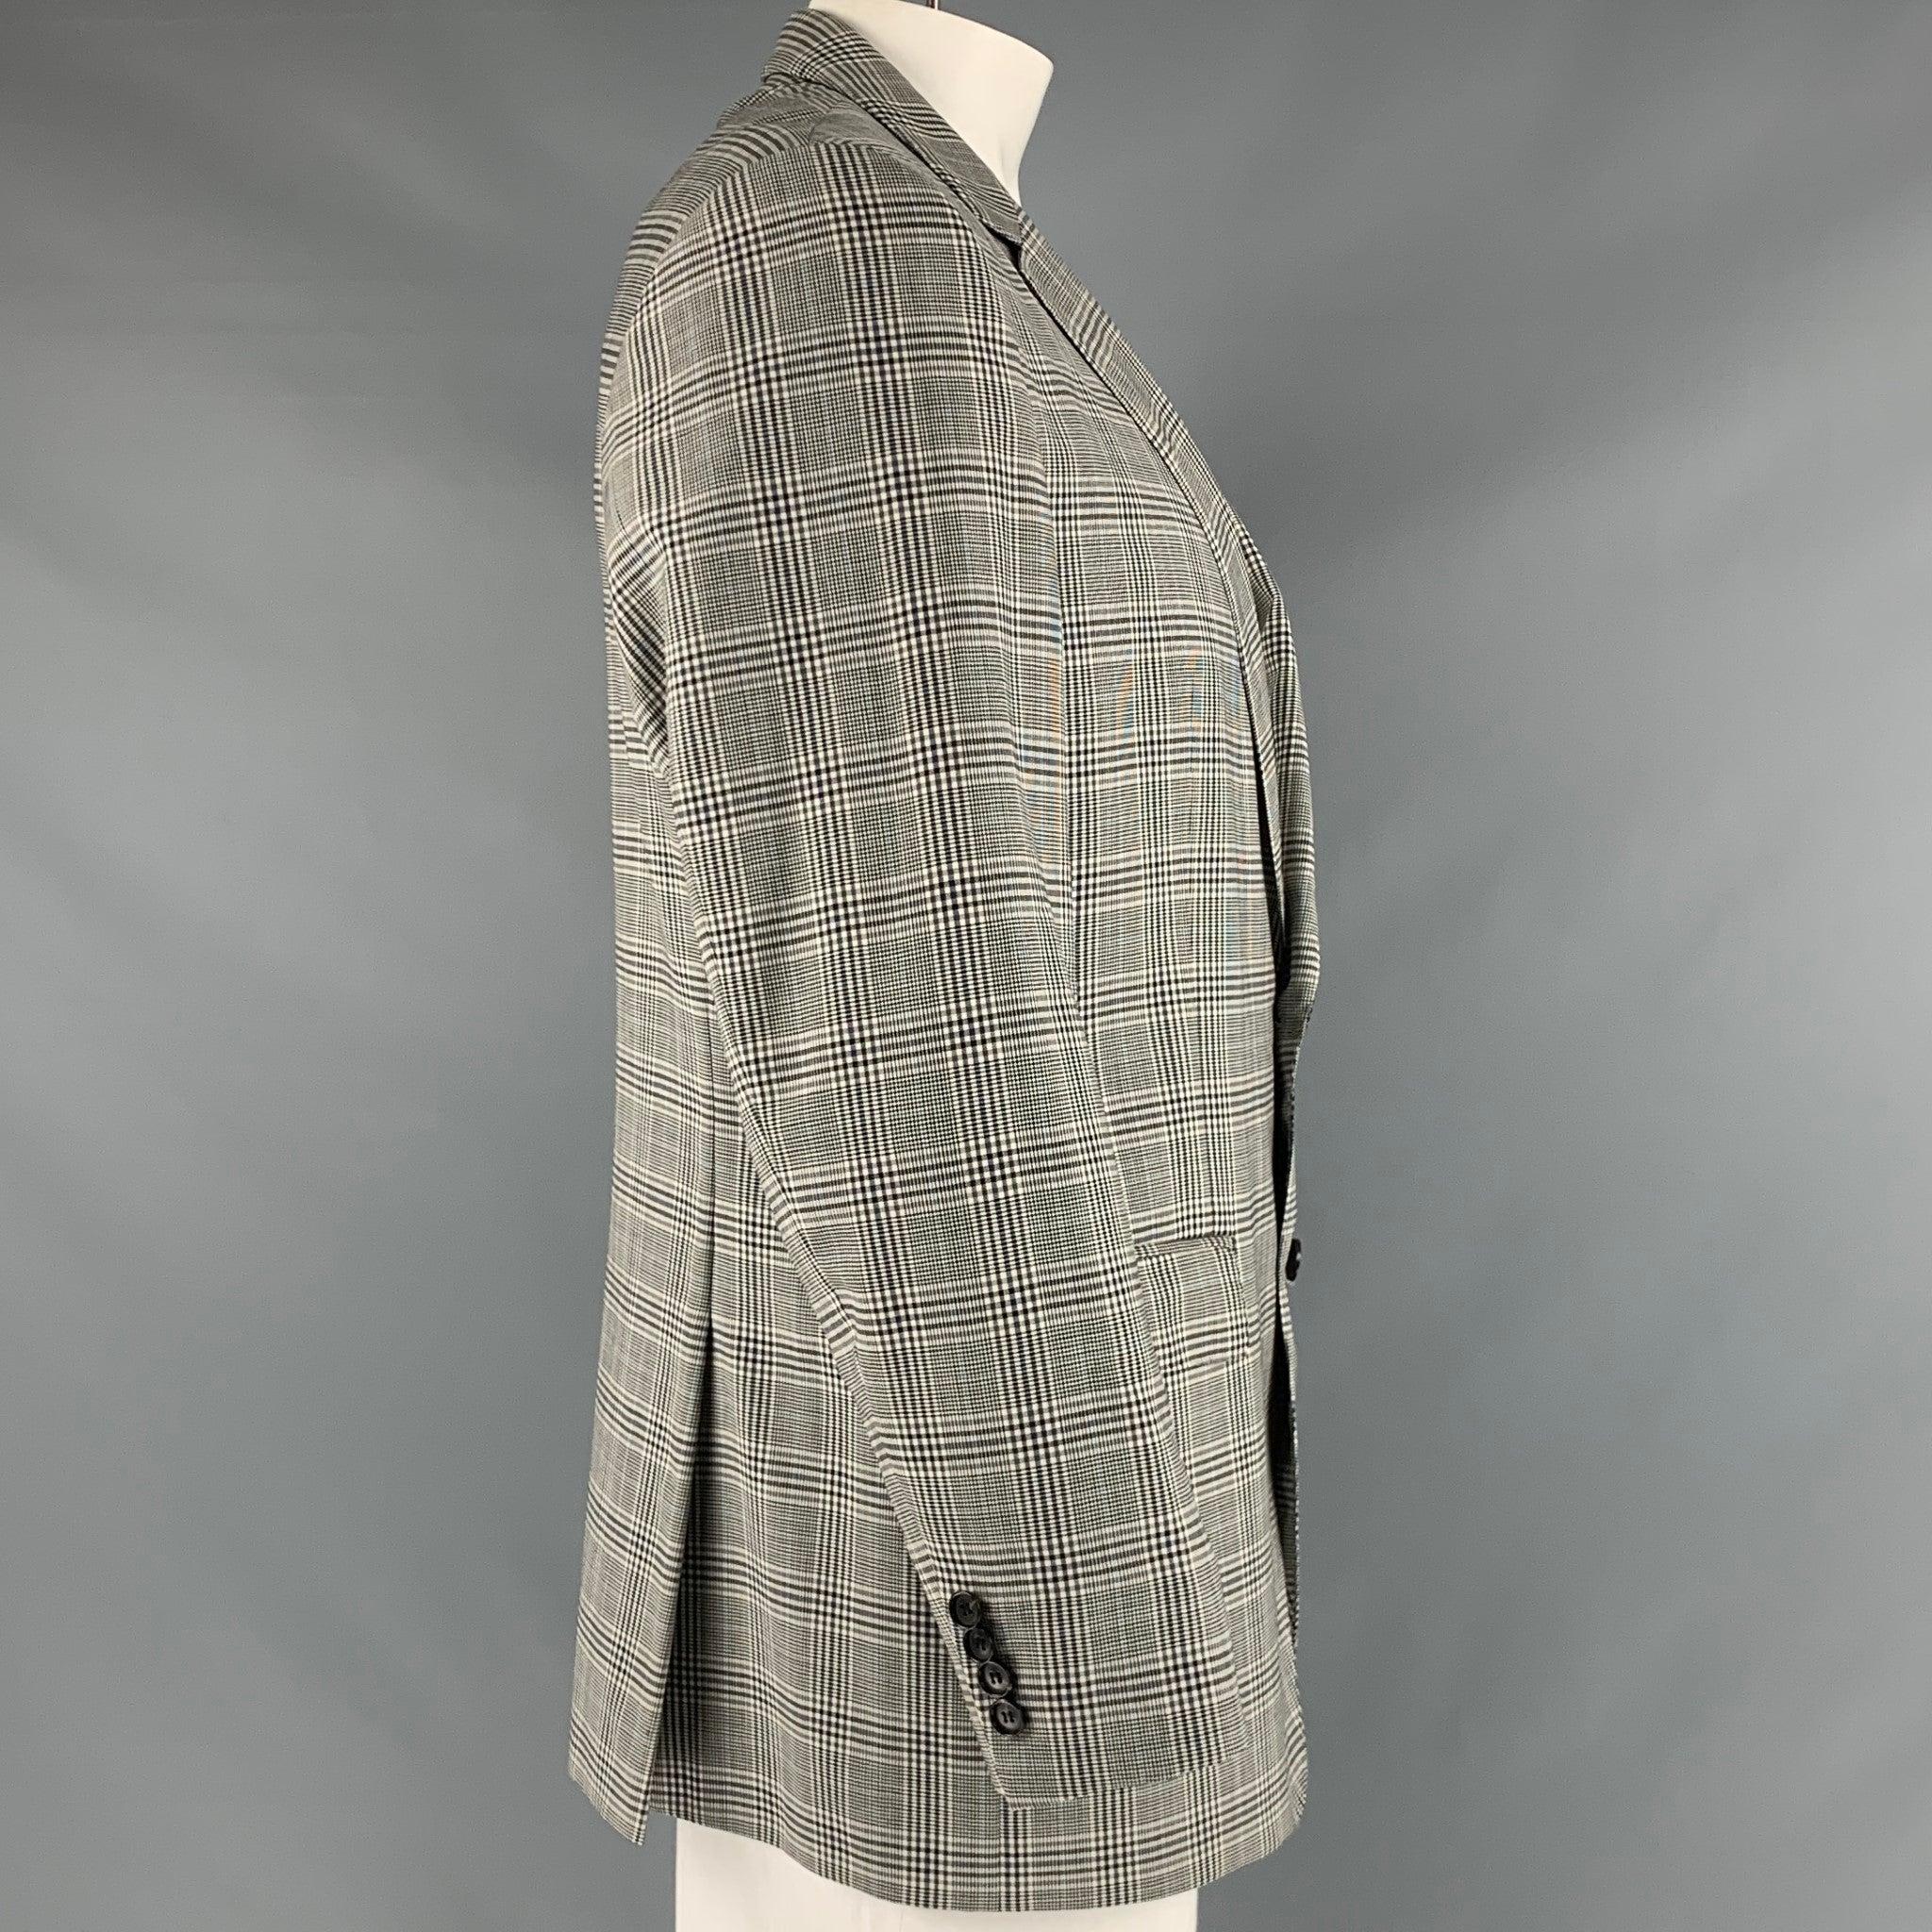 HUGO BOSS sport coat in a black, blue, and white virgin wool fabric featuring a glenplaid pattern, three pockets, and a single breasted two button closure.Very Good Pre-Owned Condition. 

Marked:   IT 54 

Measurements: 
 
Shoulder: 19 inches Chest: